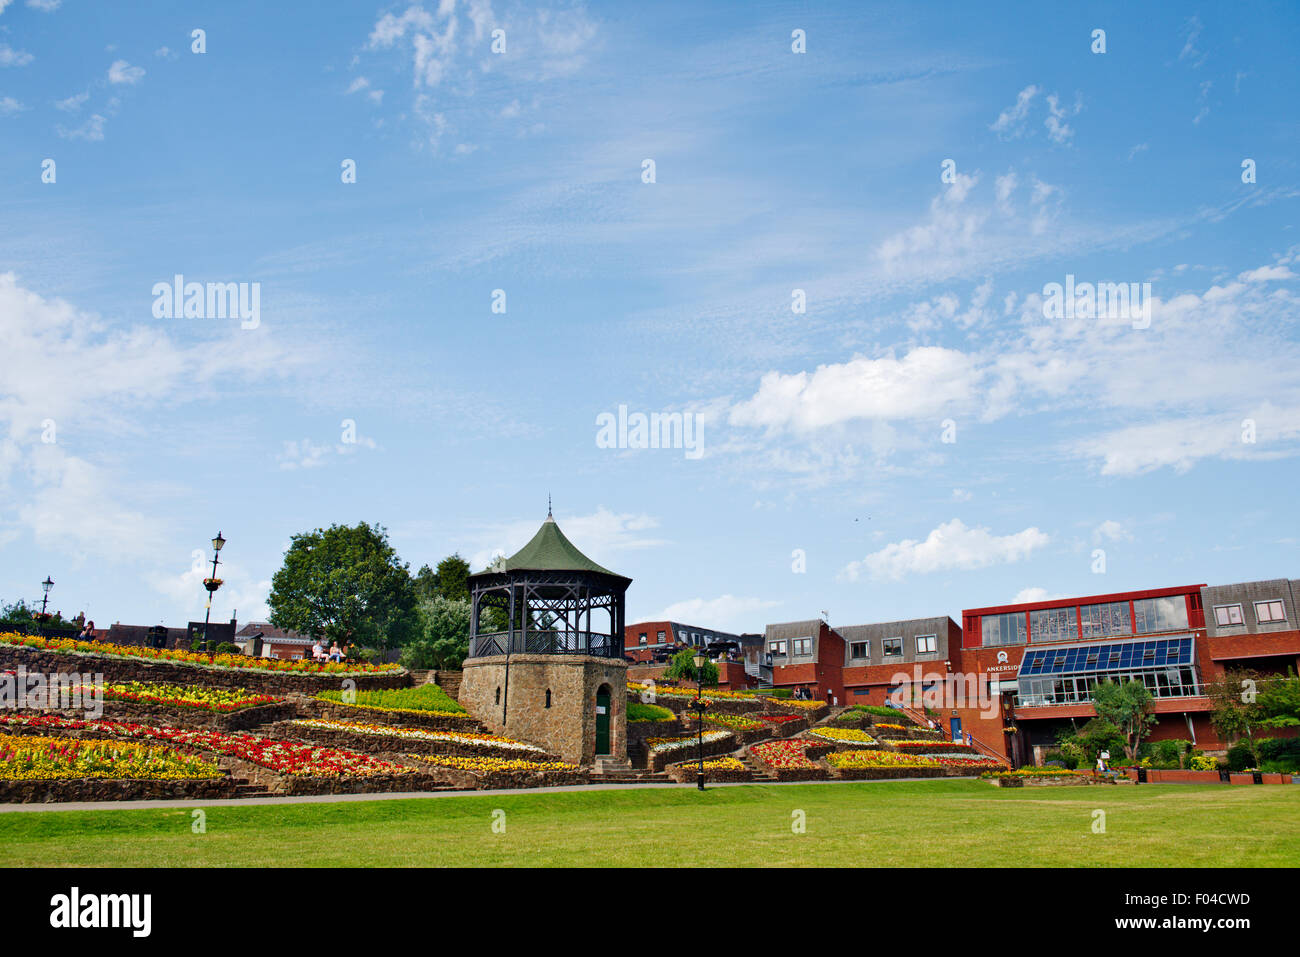 Tamworth Castle gardens, bandstand and flower beds in bloom with Ankerside Shopping Centre, Staffordshire Stock Photo